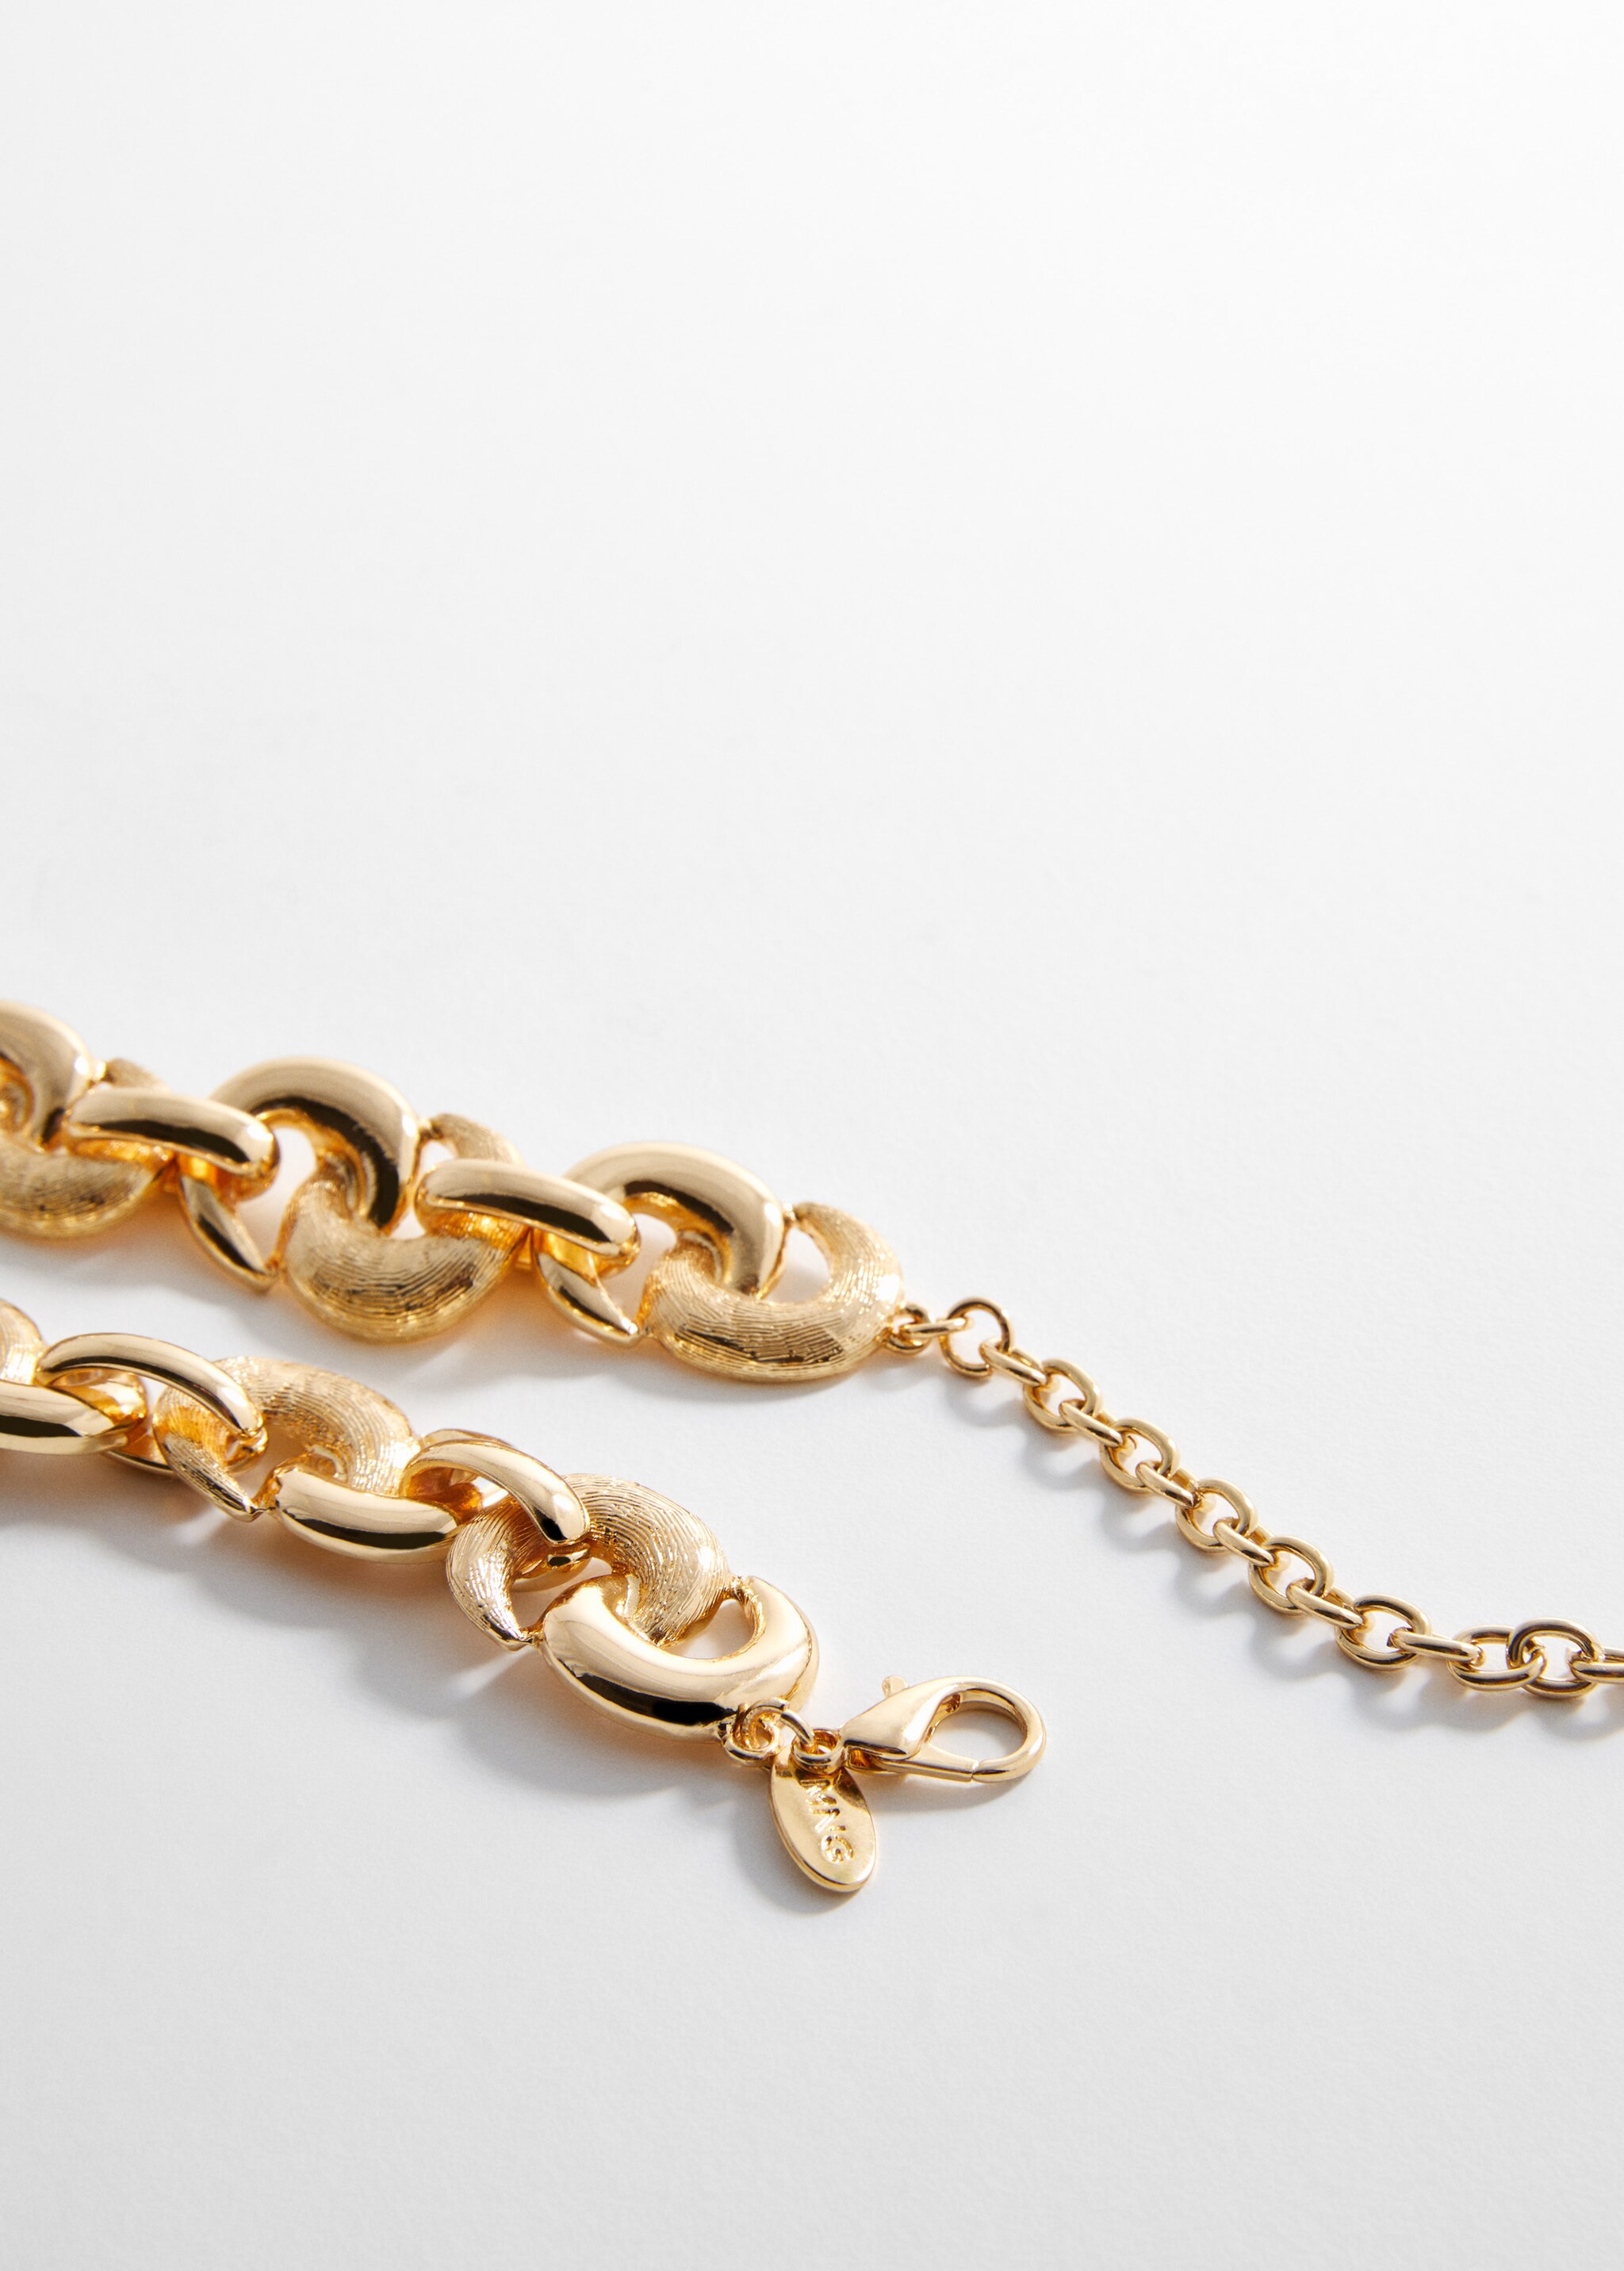 Textured chain necklace - Details of the article 1